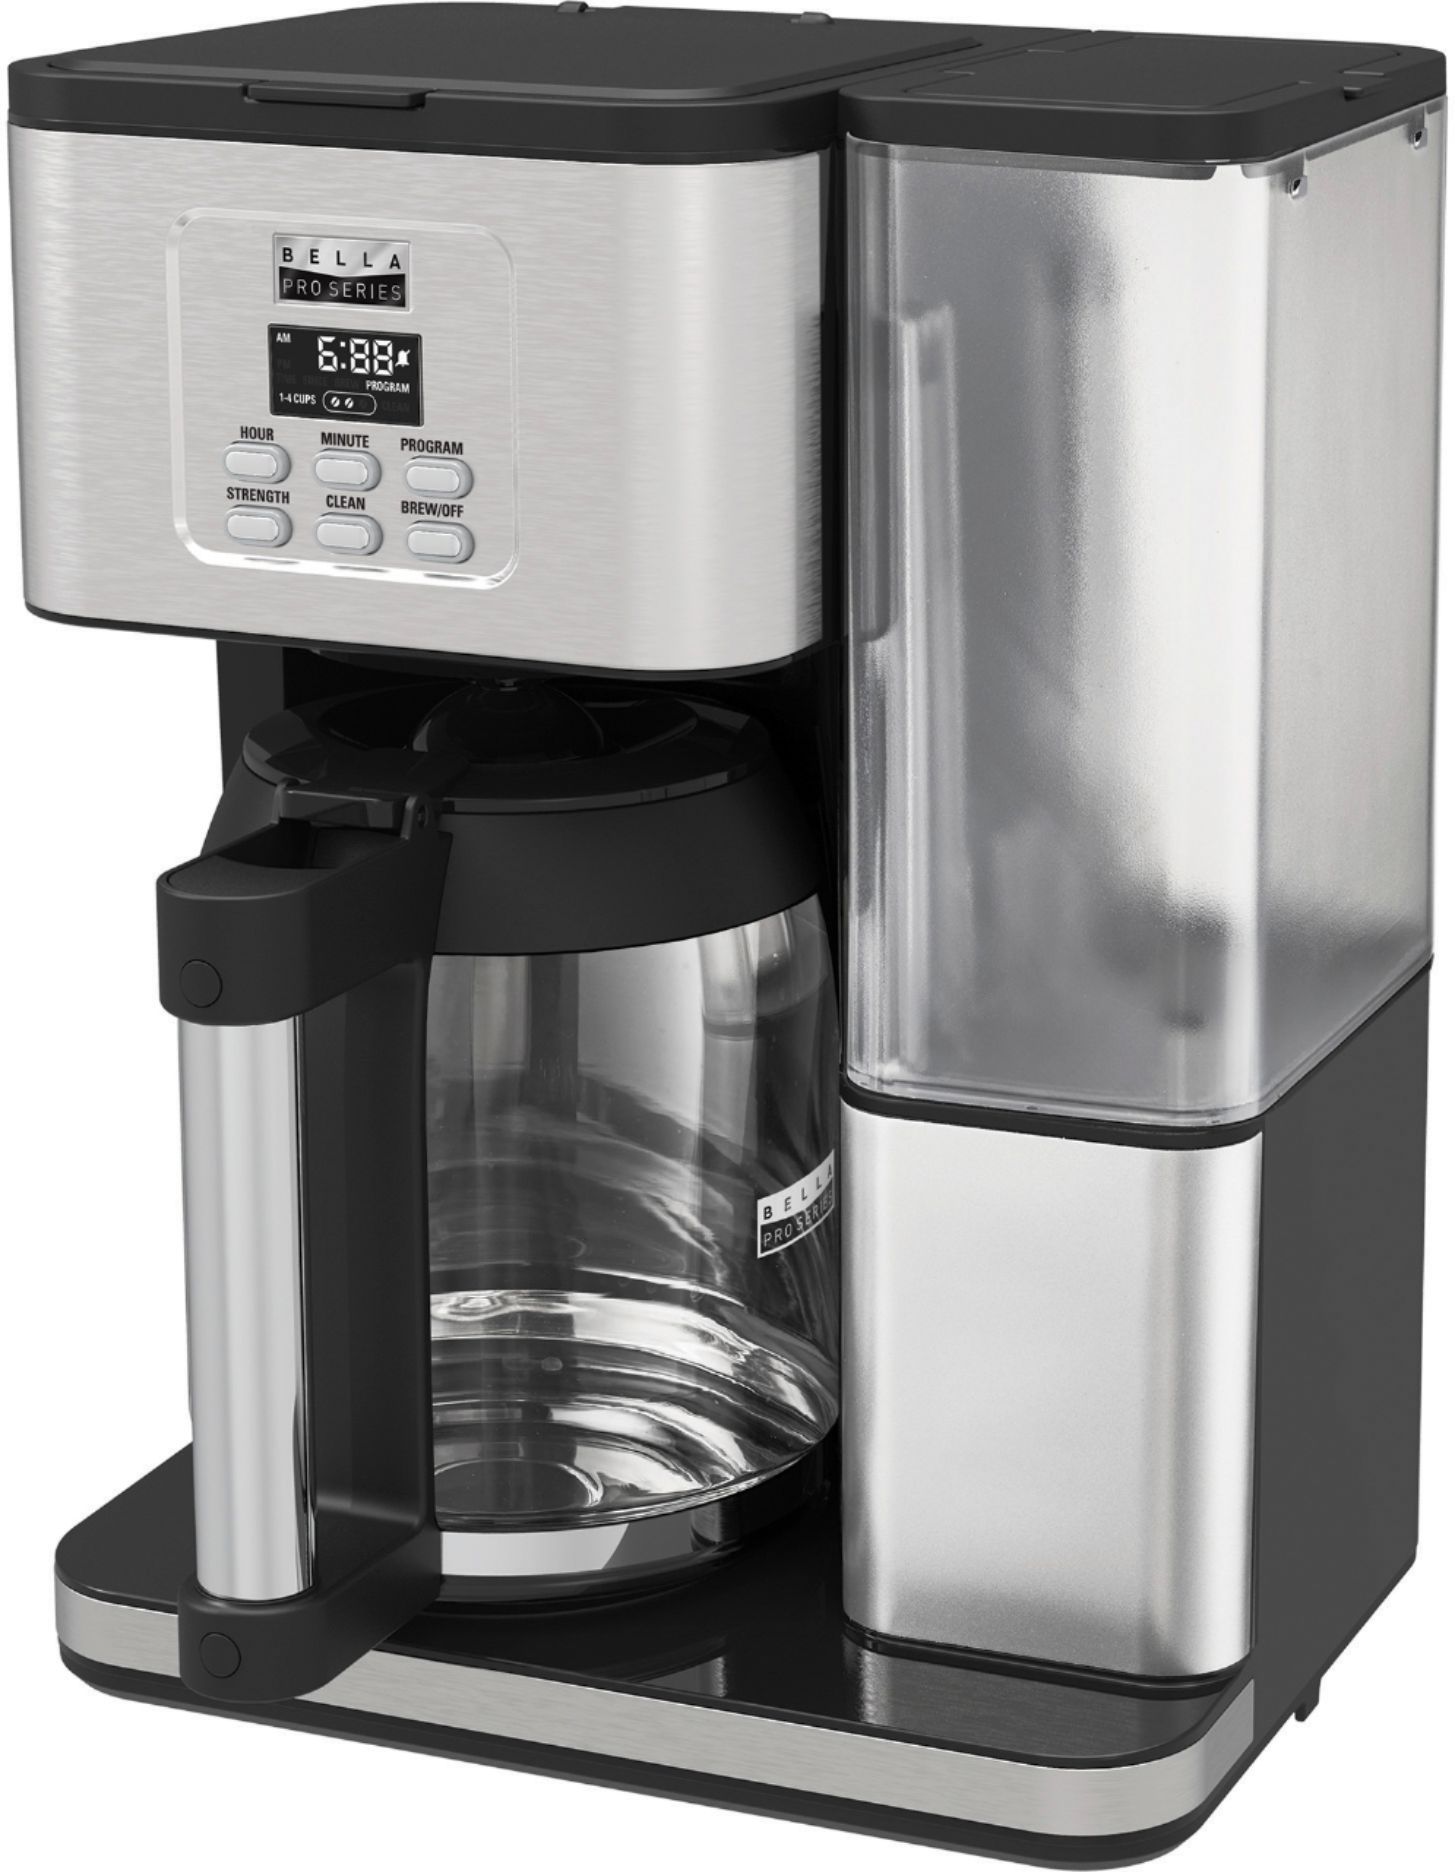 Left View: De'Longhi - Digital All-in-One Combination Coffee and Espresso Machine - Black and Stainless Steel